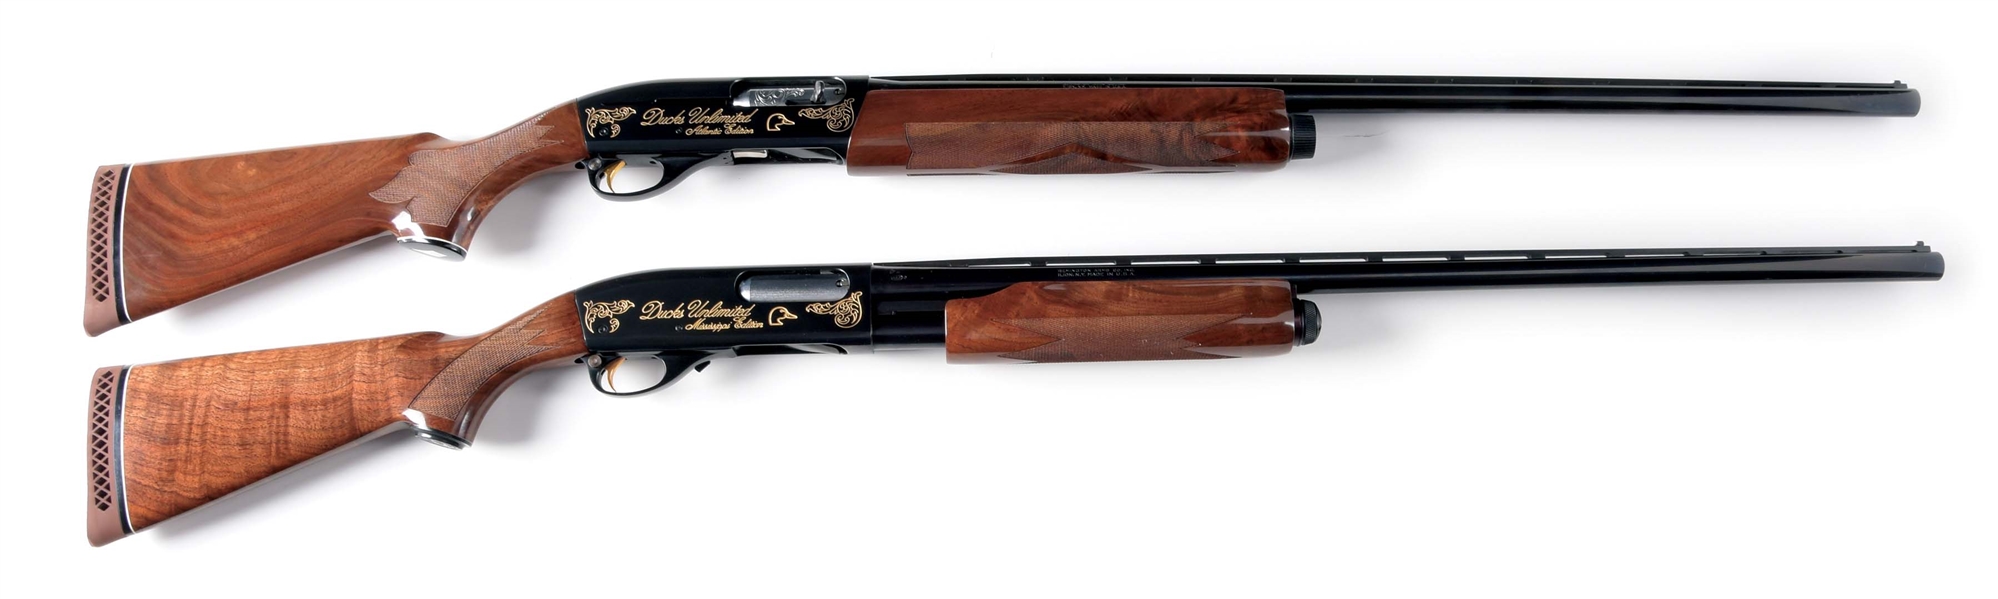 (M) LOT OF 2: REMINGTON 1100 AND 870 SEMI AUTOMATIC SHOTGUNS WITH CASES.